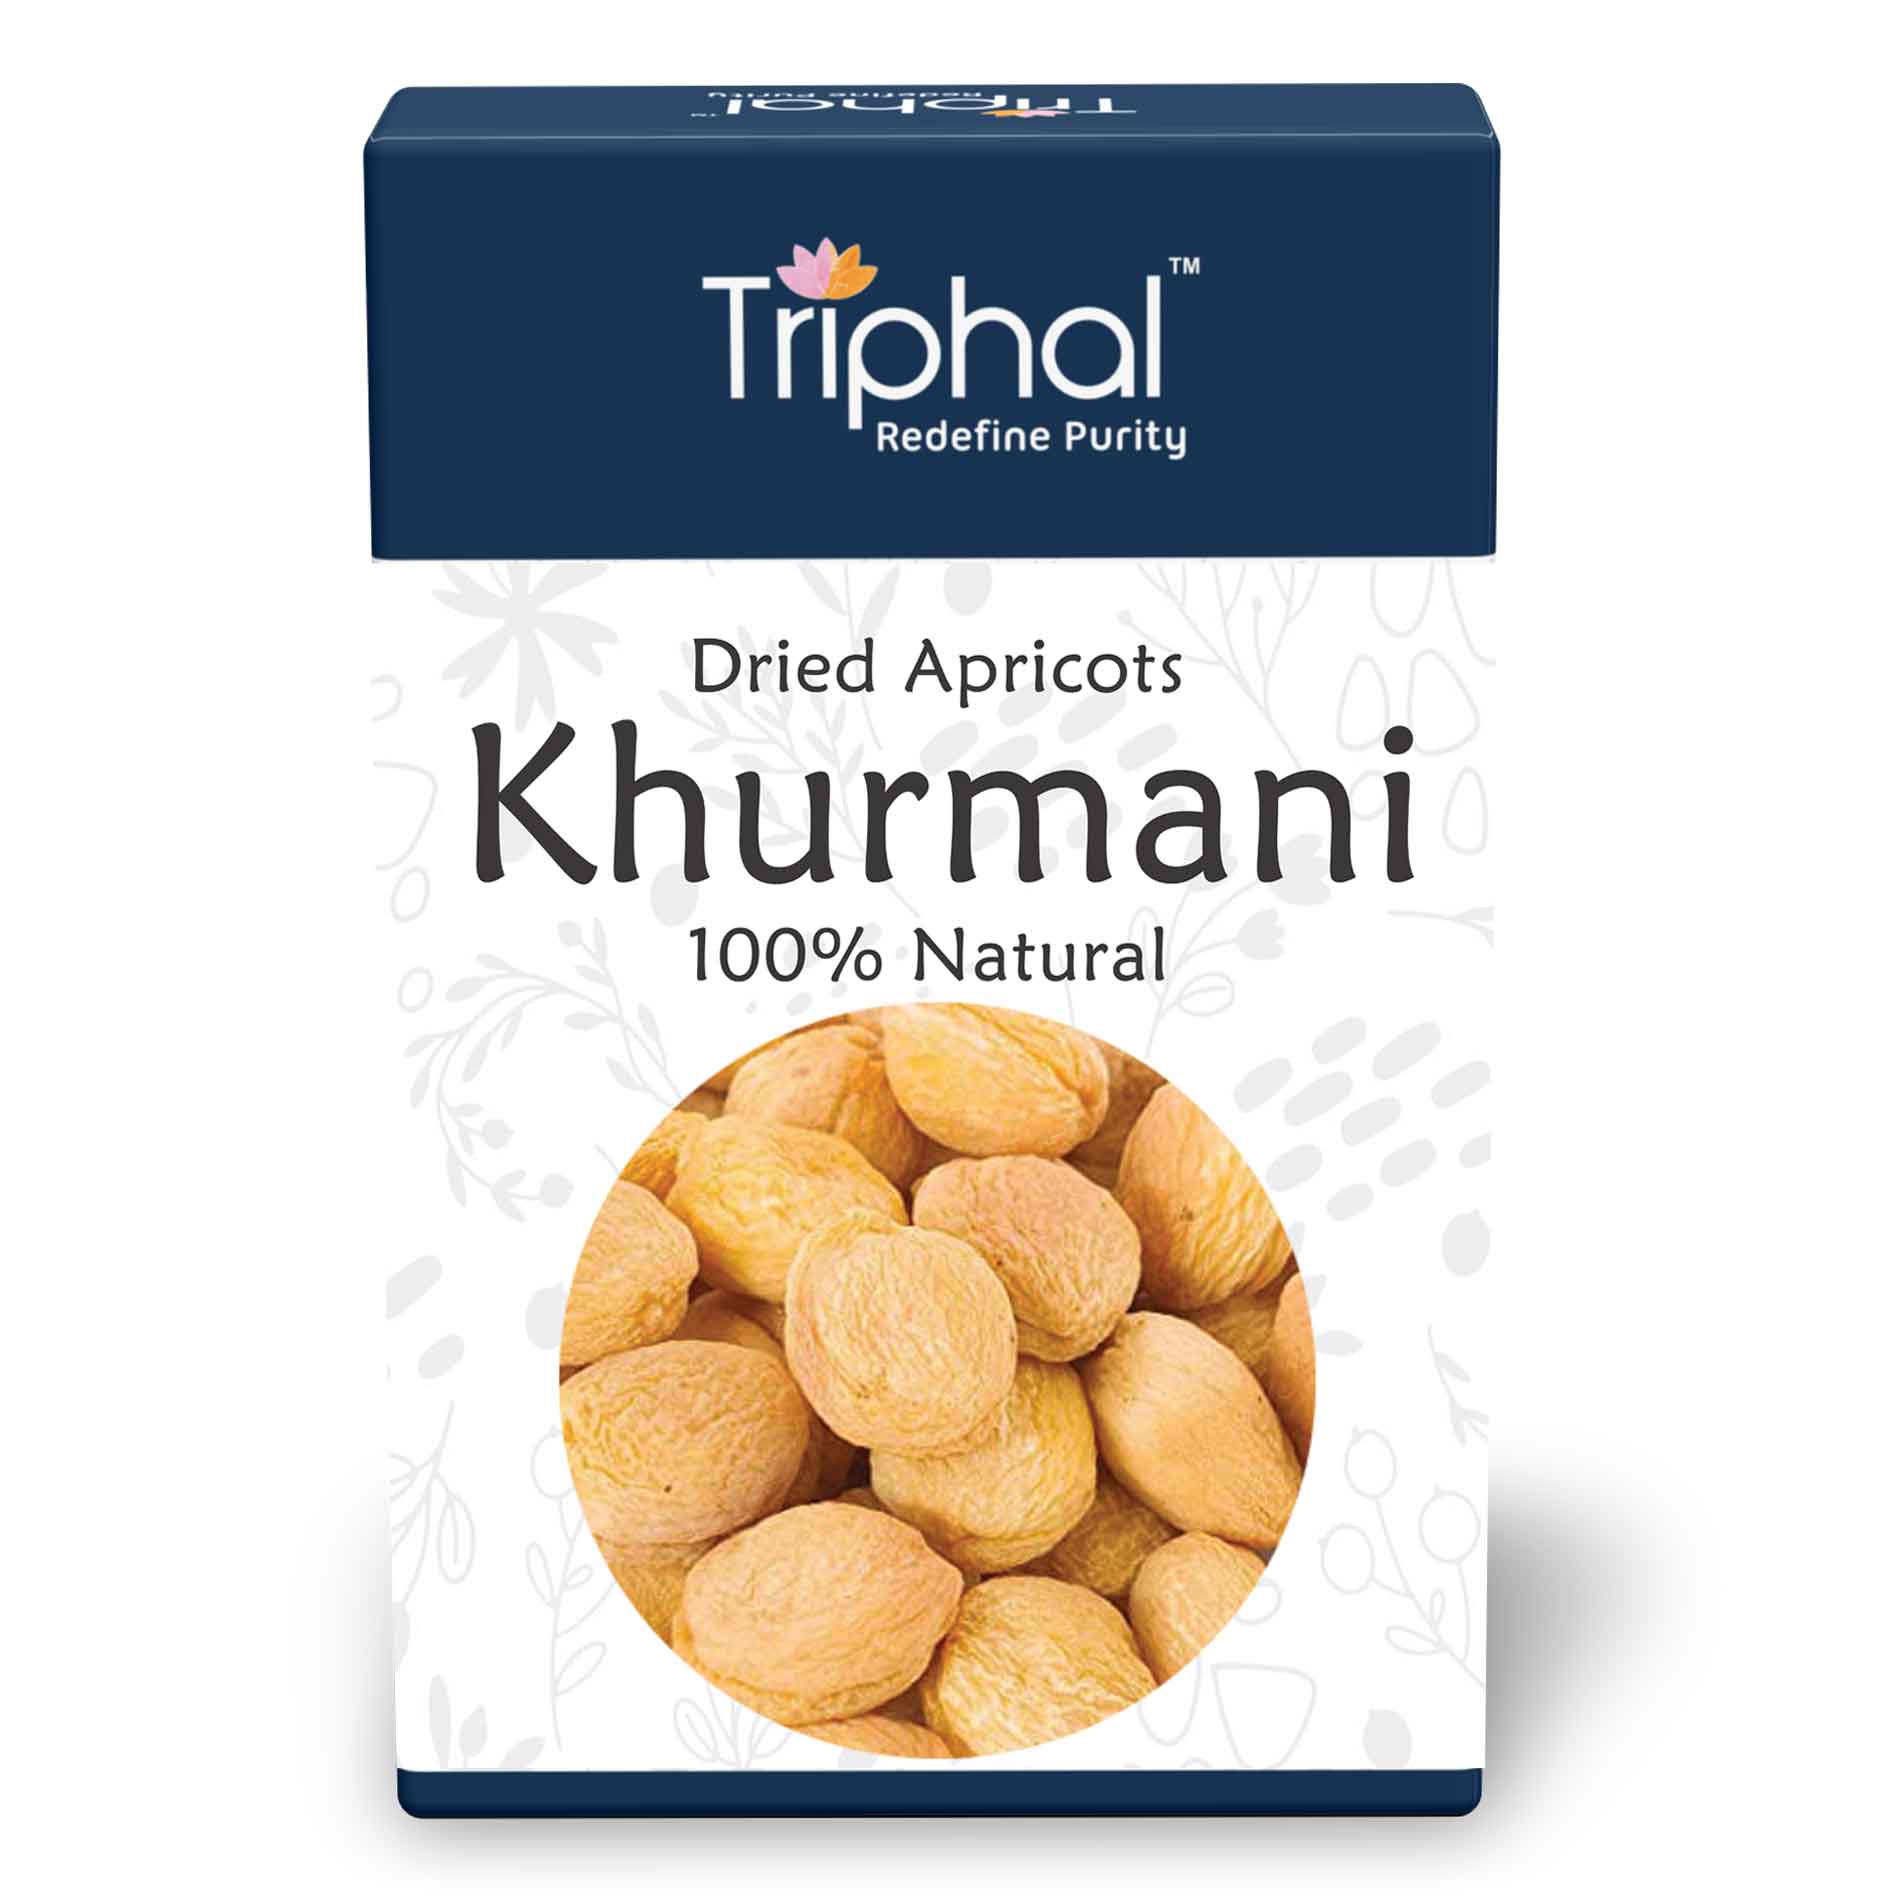 Dried Apricots - Khurmani: A Nutritious and Delicious Snack for Anytime, Anywhere by Triphal